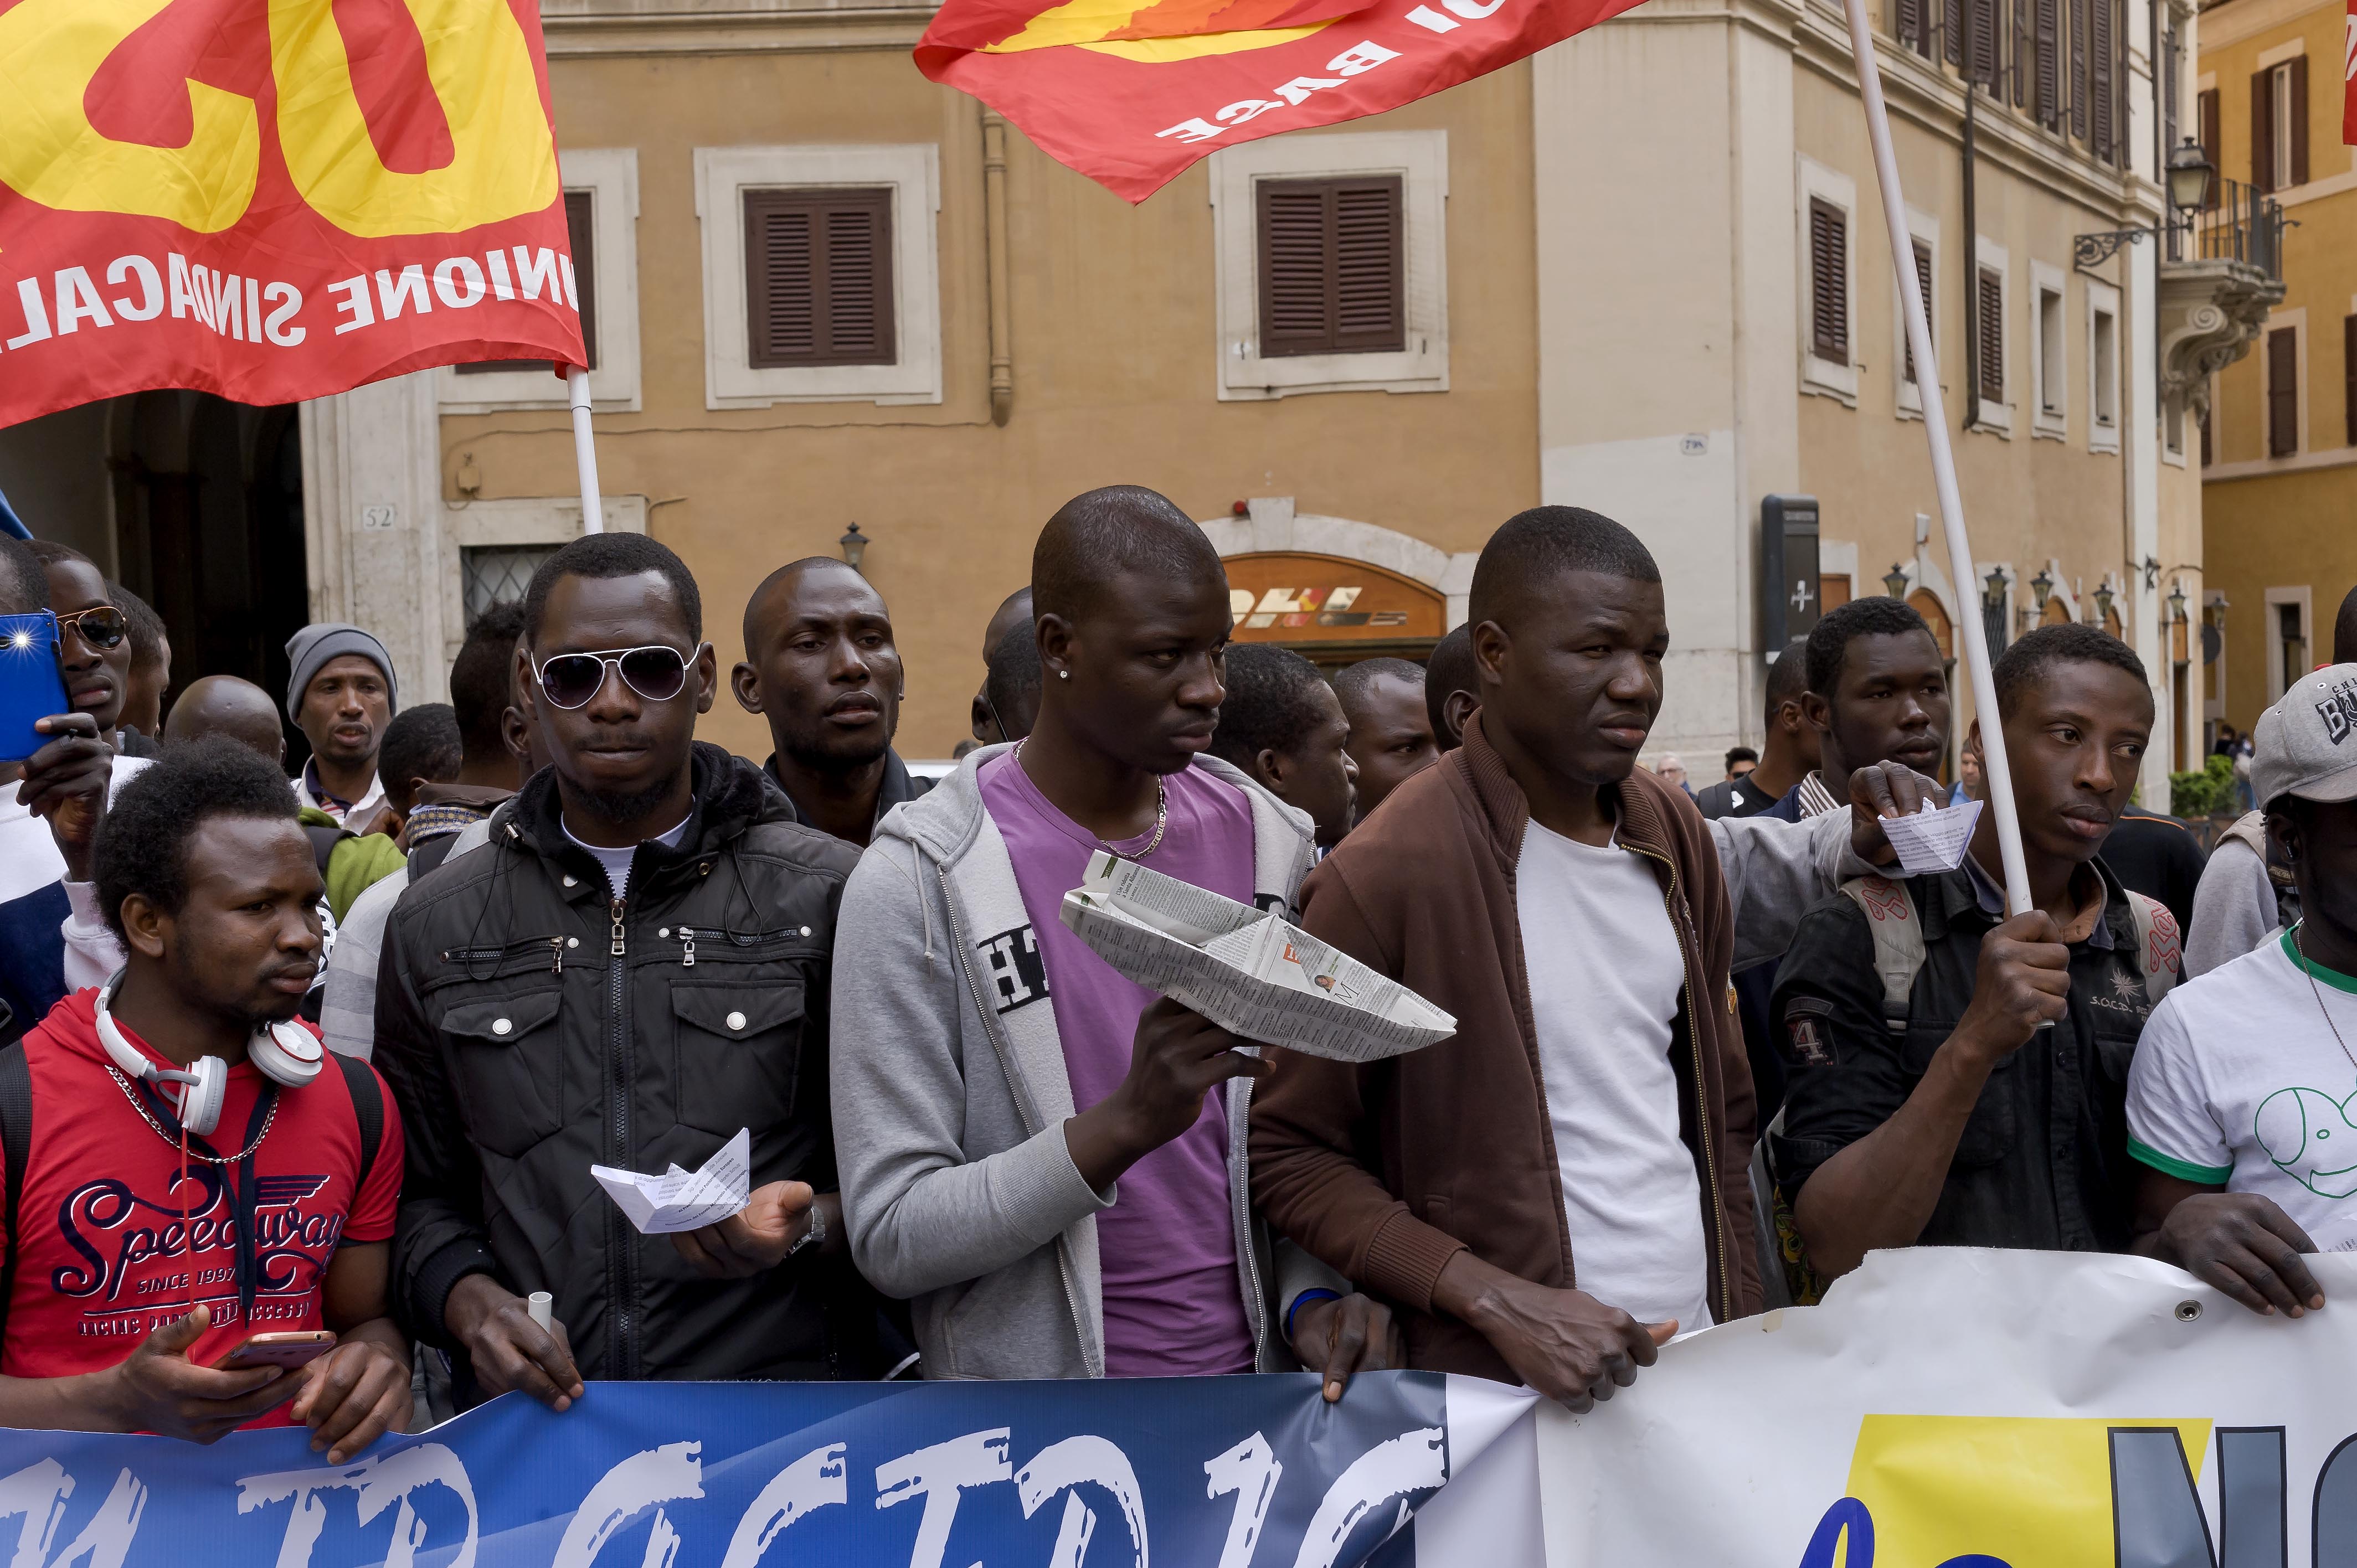 Crowds joined a rally in Rome's Piazza Montecitorio in the aftermath of a shipwreck that caused the deaths of hundreds of migrants, calling for a change in immigration policies and the right to freedom of movement in Europe. Photo by Stefano Montesi. Copyright Demotix